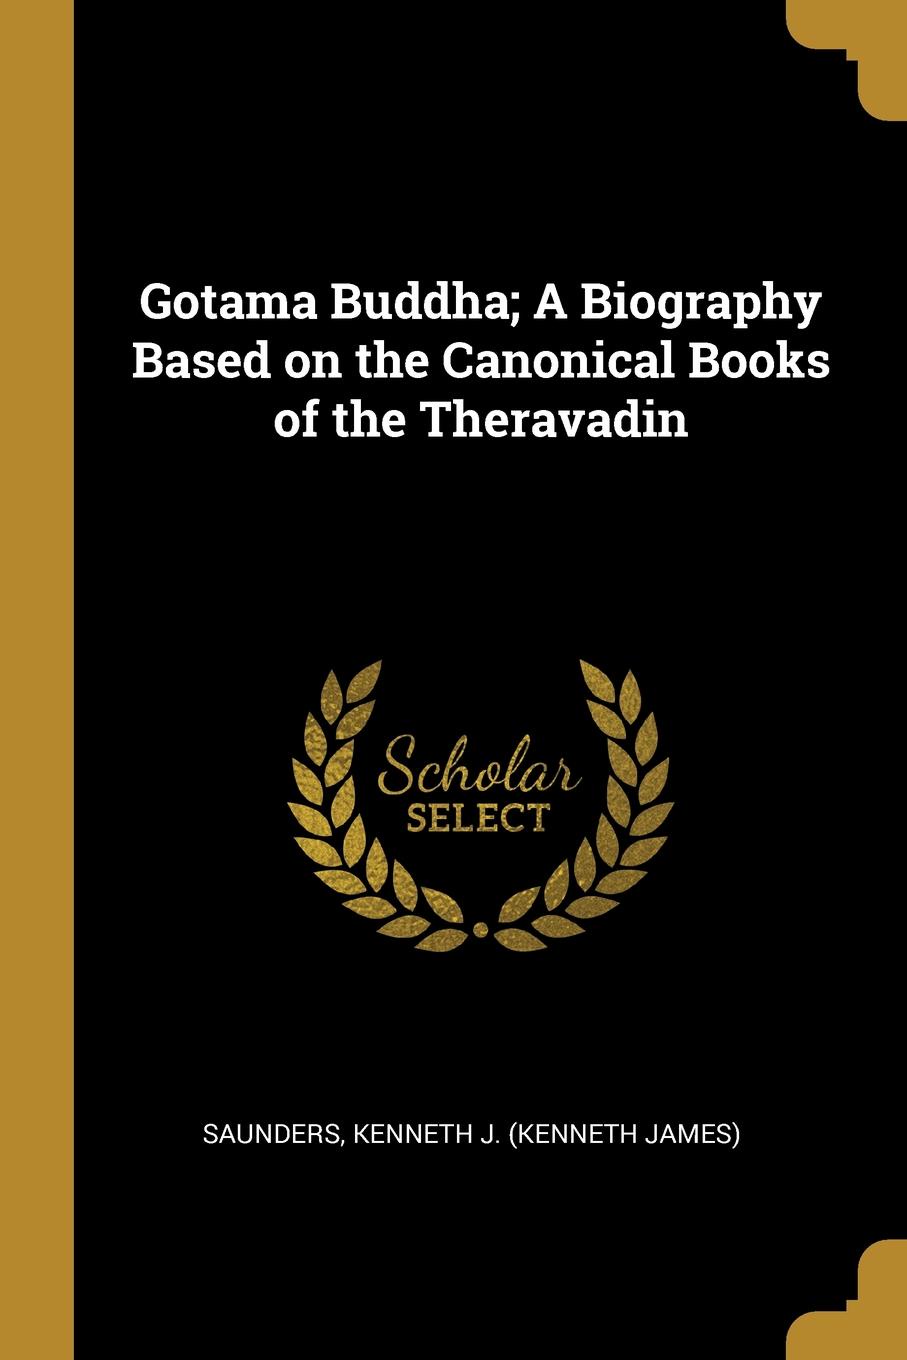 Gotama Buddha; A Biography Based on the Canonical Books of the Theravadin